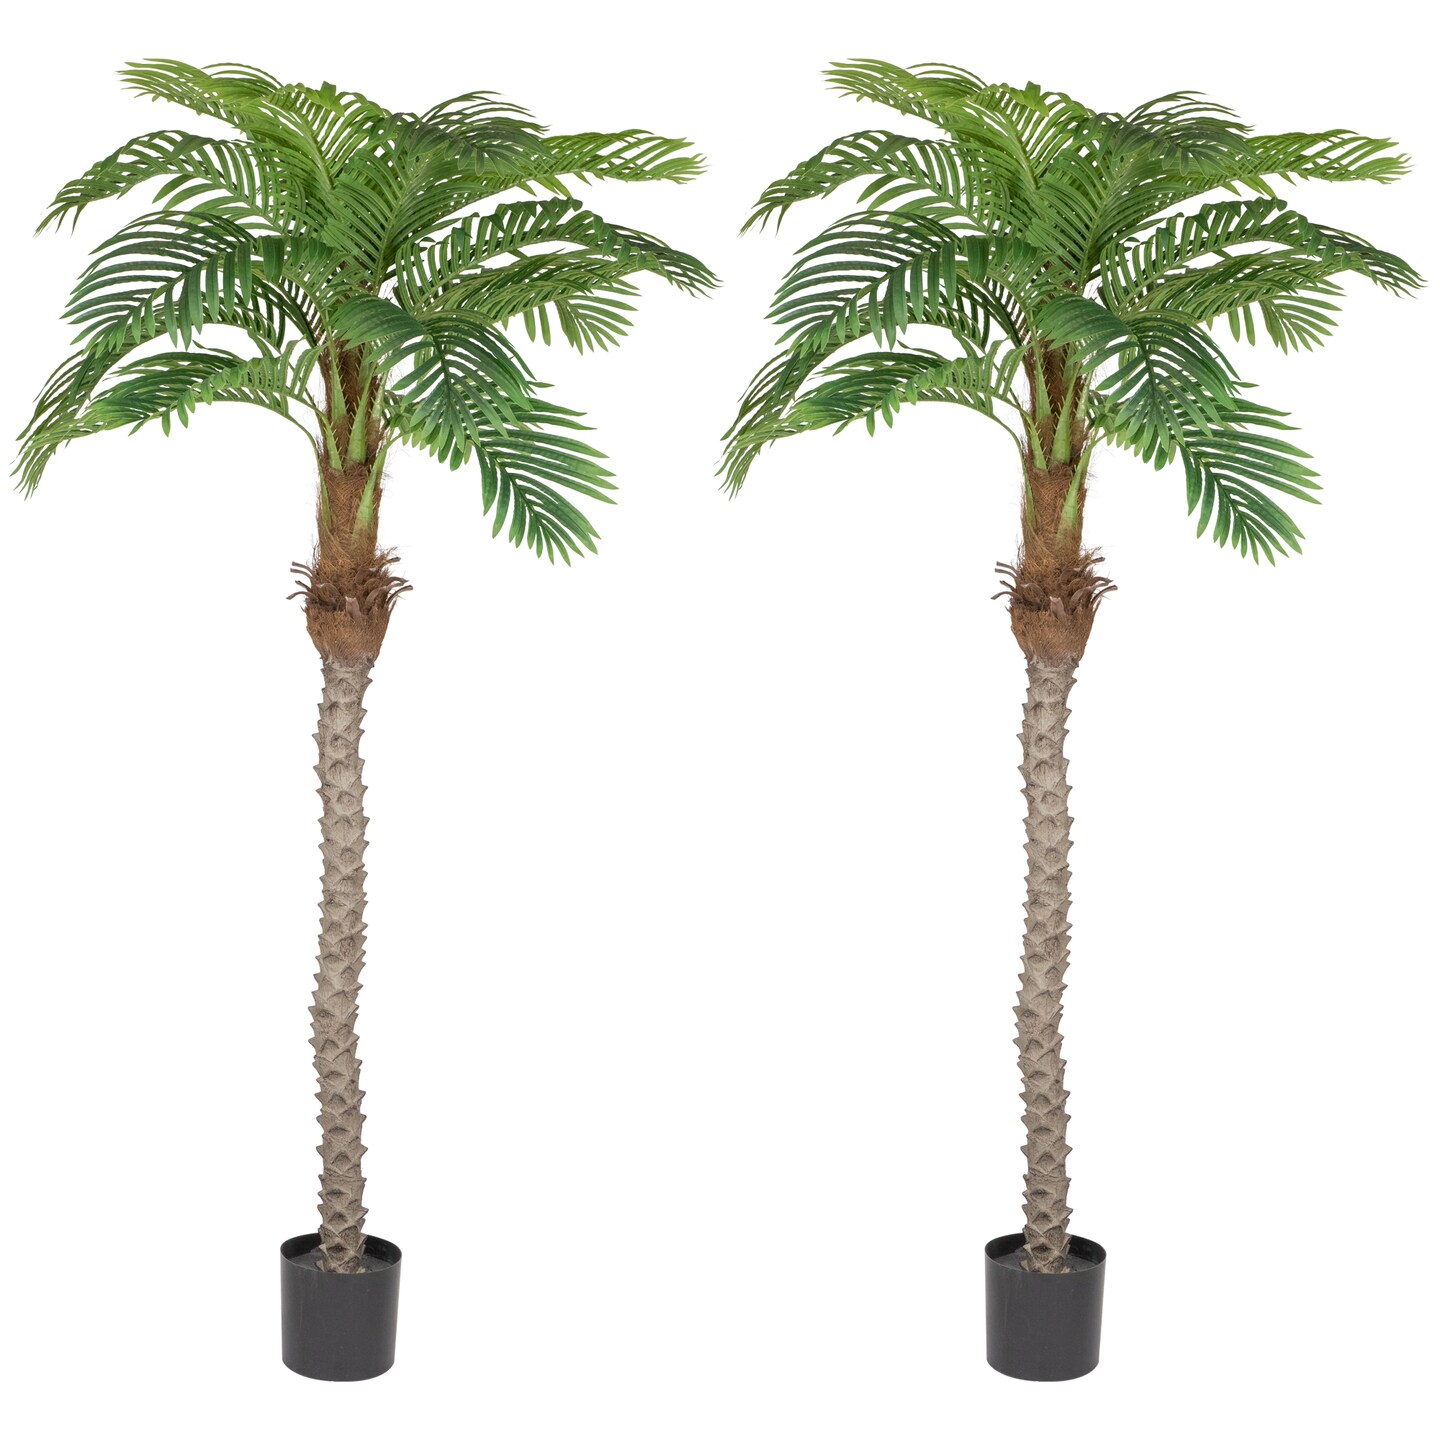 Northlight Artificial Potted Palm Trees - 6' - Set of 2 | Michaels